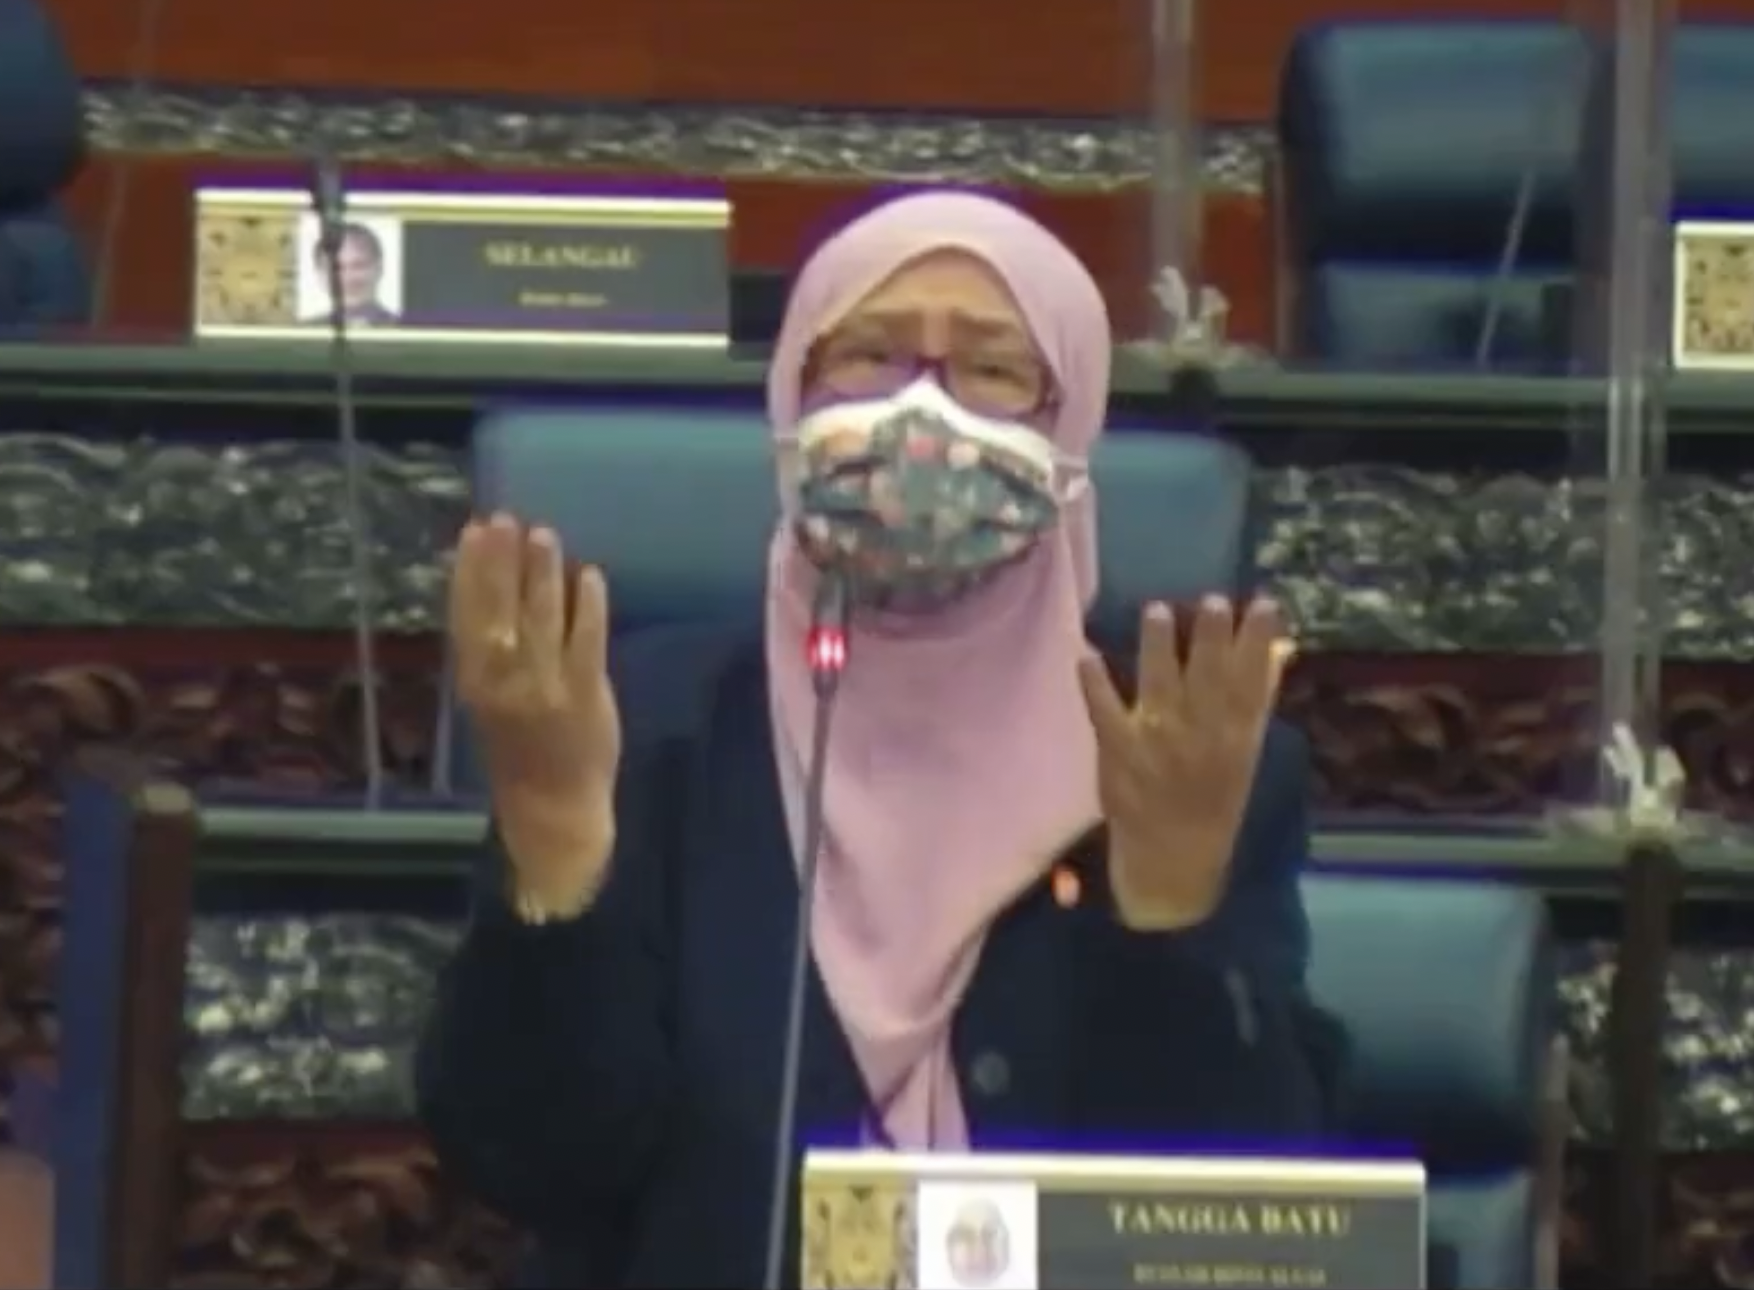 Pkr mp stirs uproar by claiming consumption of timah whiskey is akin to 'drinking malay women' | weirdkaya